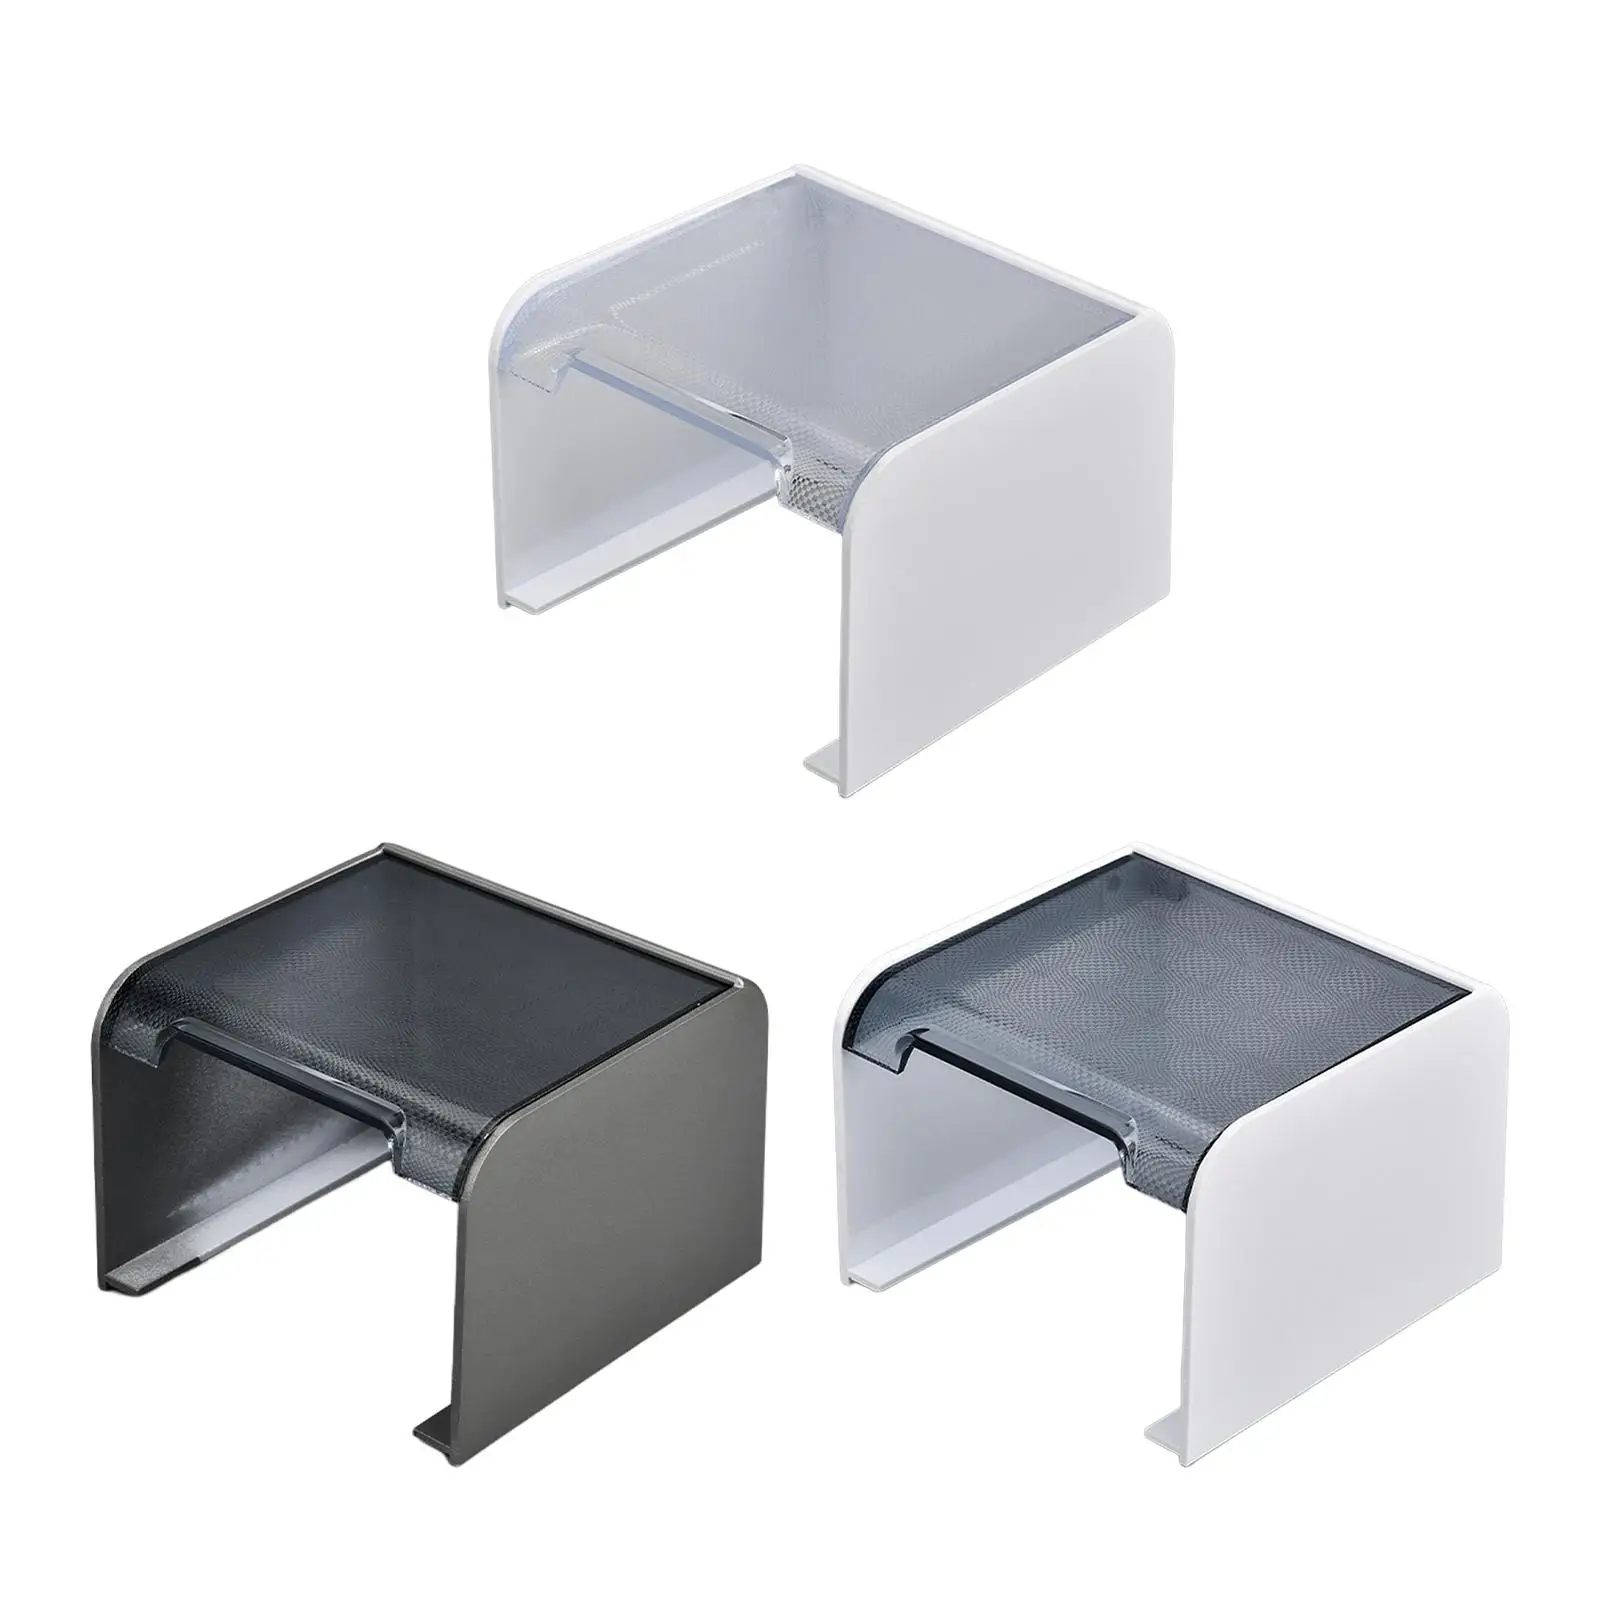 Socket Cover Socket Protection Box 86 Type Switch Box for Home Improvement Warehouse Restaurant Indoor Outdoor